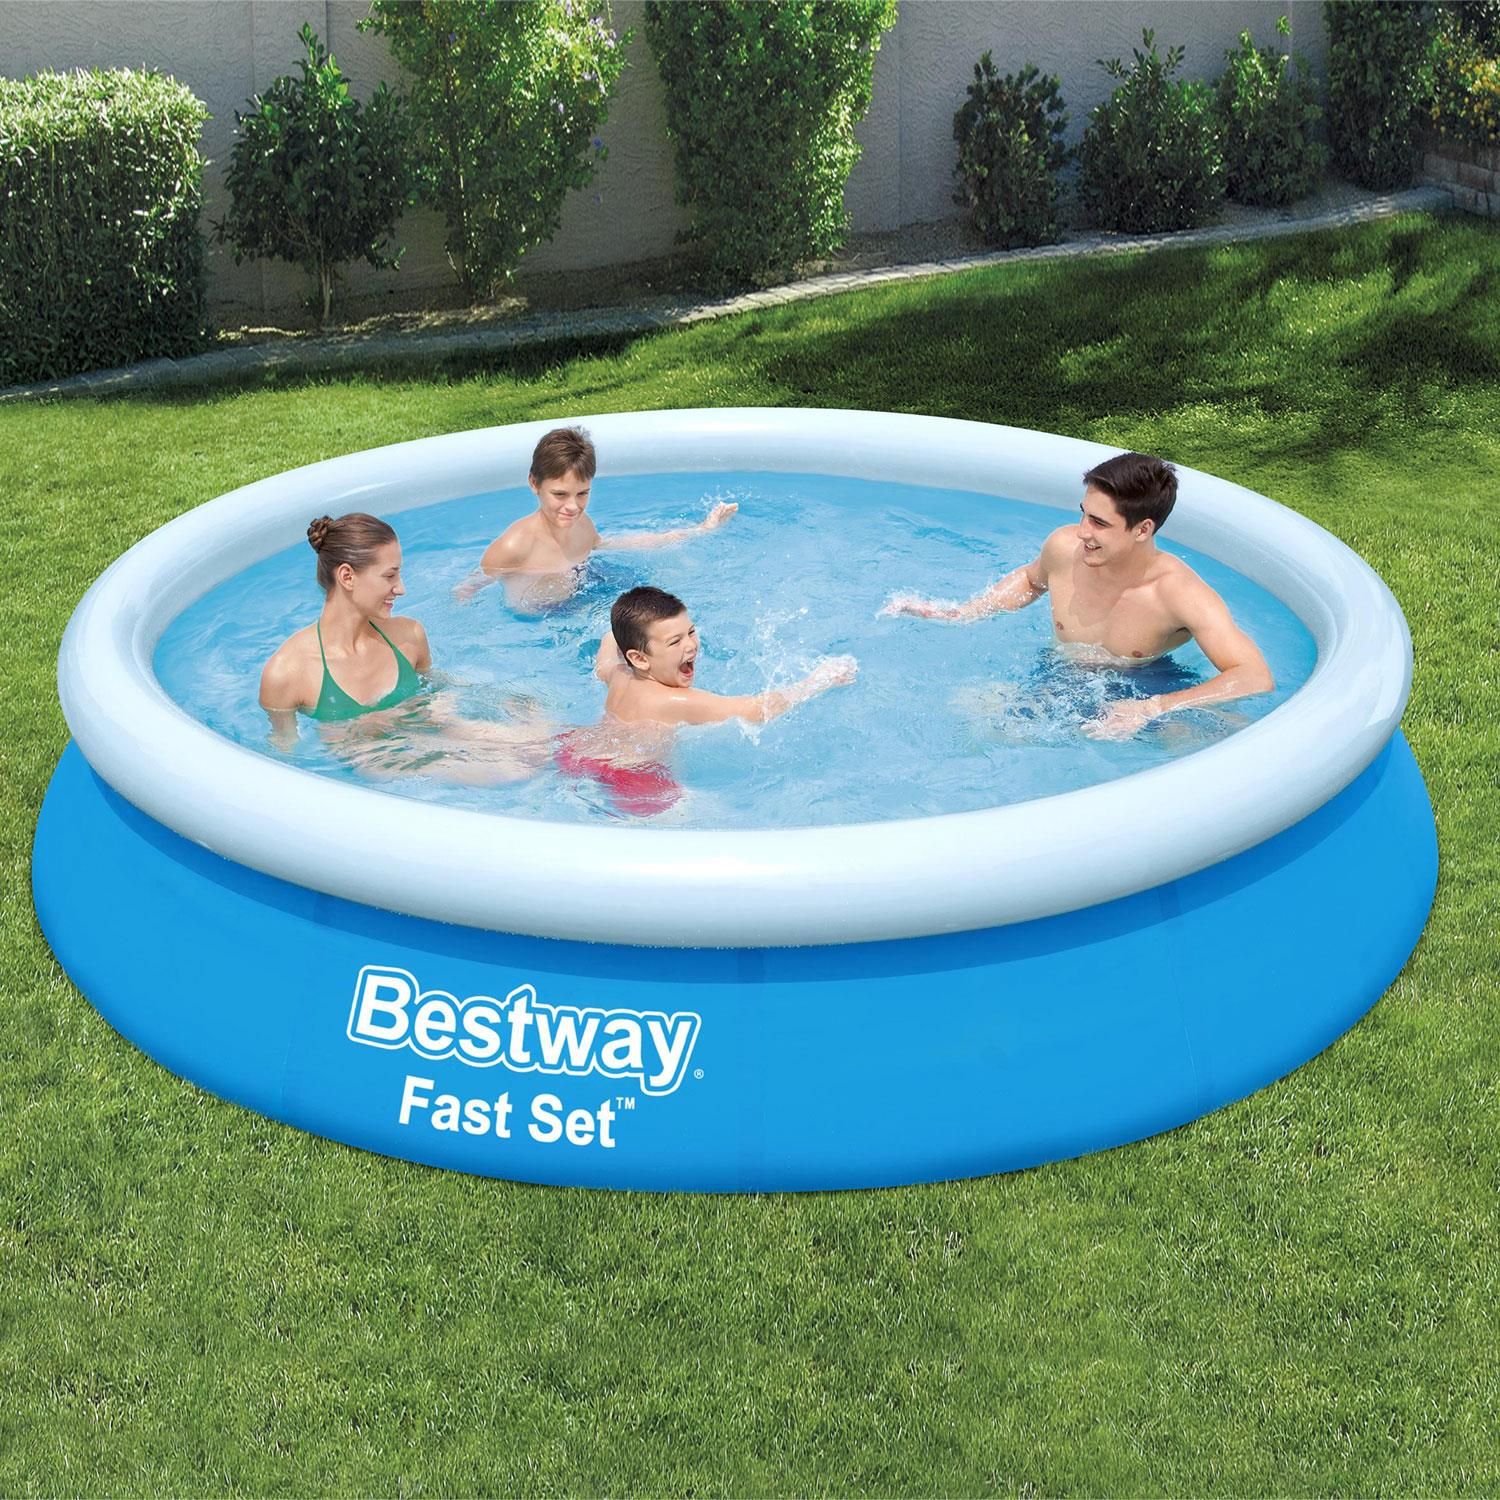 The 12' x 30'' / 3.66m x 76cm Fast Set™ Pool Set by Bestway is a great family swimming pool. It sets up in only a matter of minutes on a flat surface as only the top ring needs inflated; the body of the pool has a liner that lifts when you fill the pool with water. It also comes with a flow control drain valve, allowing it to be drained quickly at the end of the season. The Fast Set™ Pool is constructed of tough Tritech material, making it extremely durable and guarantees to keep the family swimming for years to come!

Safety measures :

Never dive into any shallow body of water. This can lead to serious injury or death. 
Do not use the swimming pool when using alcohol or medication that may impair your ability to safely use the pool.
When pool covers are used, remove them completely from the water surface before entering the pool.
Protect pool occupants from water related illnesses by keeping the pool water treated and practicing good hygiene.
Consult the water treatment guidelines in the user’s manual. 
Store chemicals (e.g. water treatment, cleaning or disinfection products) out of the reach of children. Use the signage as outlined below. Signage is to be displayed in a prominent position within 2m of the pool.
Keep children under supervision in the aquatic environment. No diving. 
Removable ladders shall be placed on a horizontal surface.
Irrespective of materials used for swimming pool construction, accessible surfaces have to be checked regularly to avoid injuries. 
Regularly monitor bolts and screws. Remove splinters or any sharp edges to avoid injuries.

Box Contains :
1 x Fast Set 12' x 30